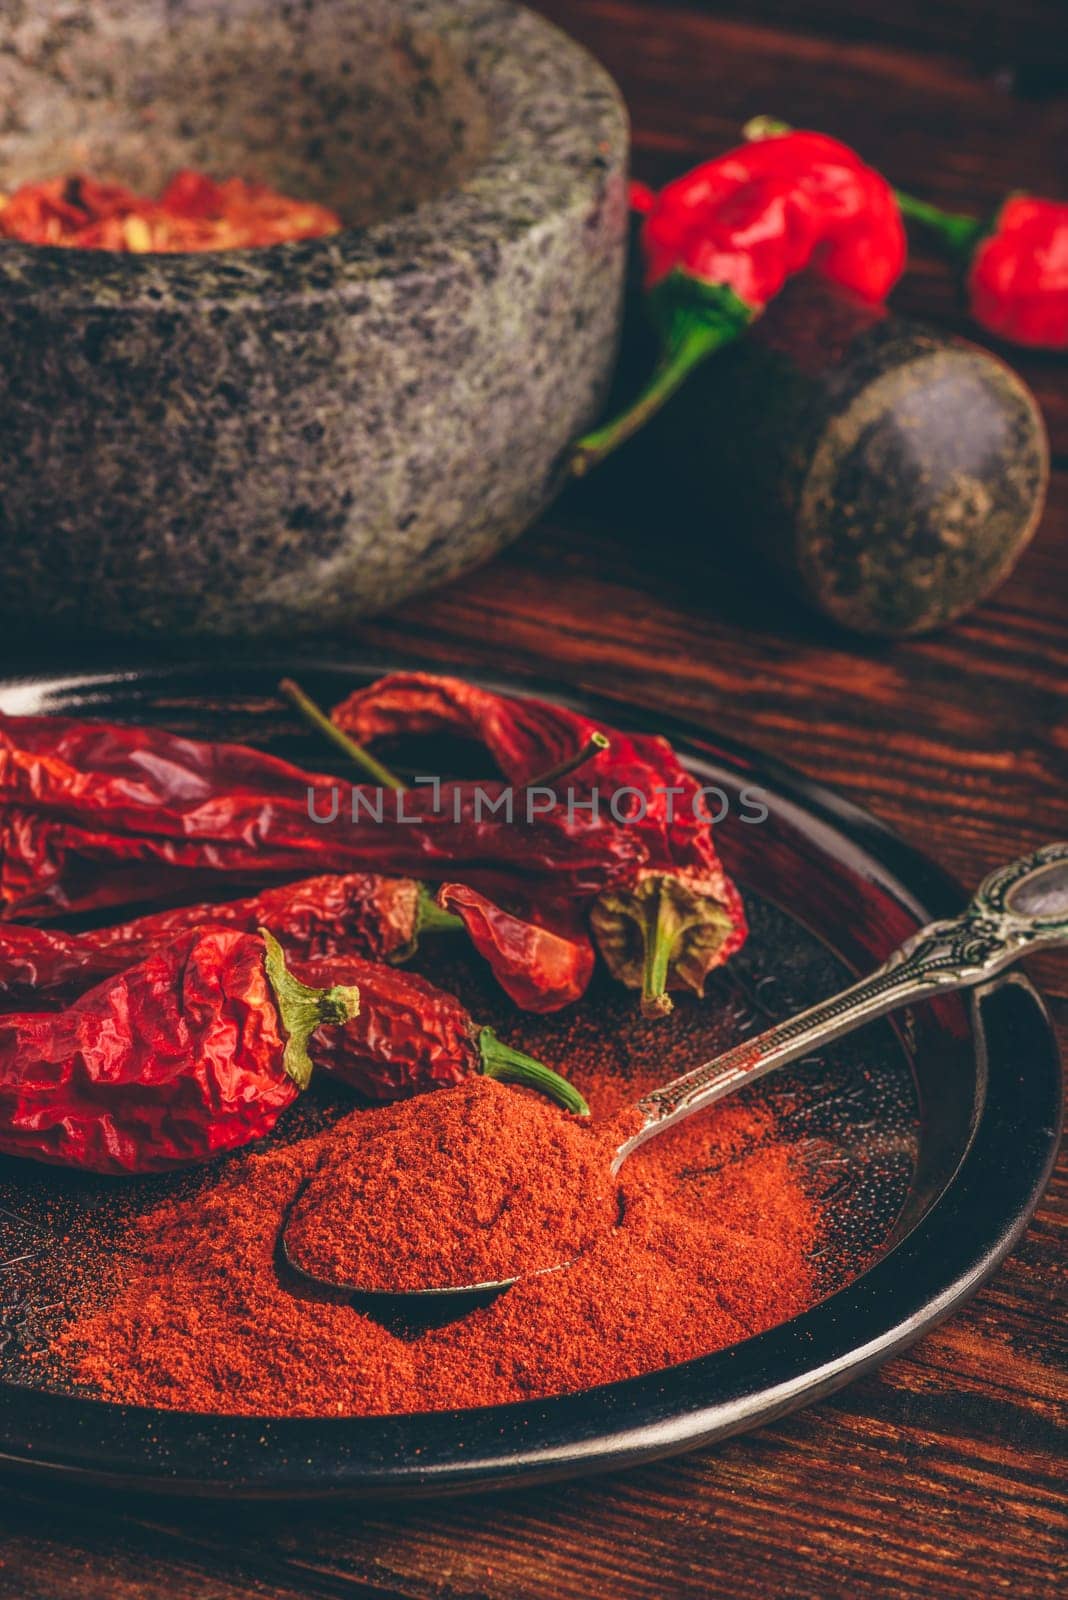 Spoonful of ground chili pepper by Seva_blsv